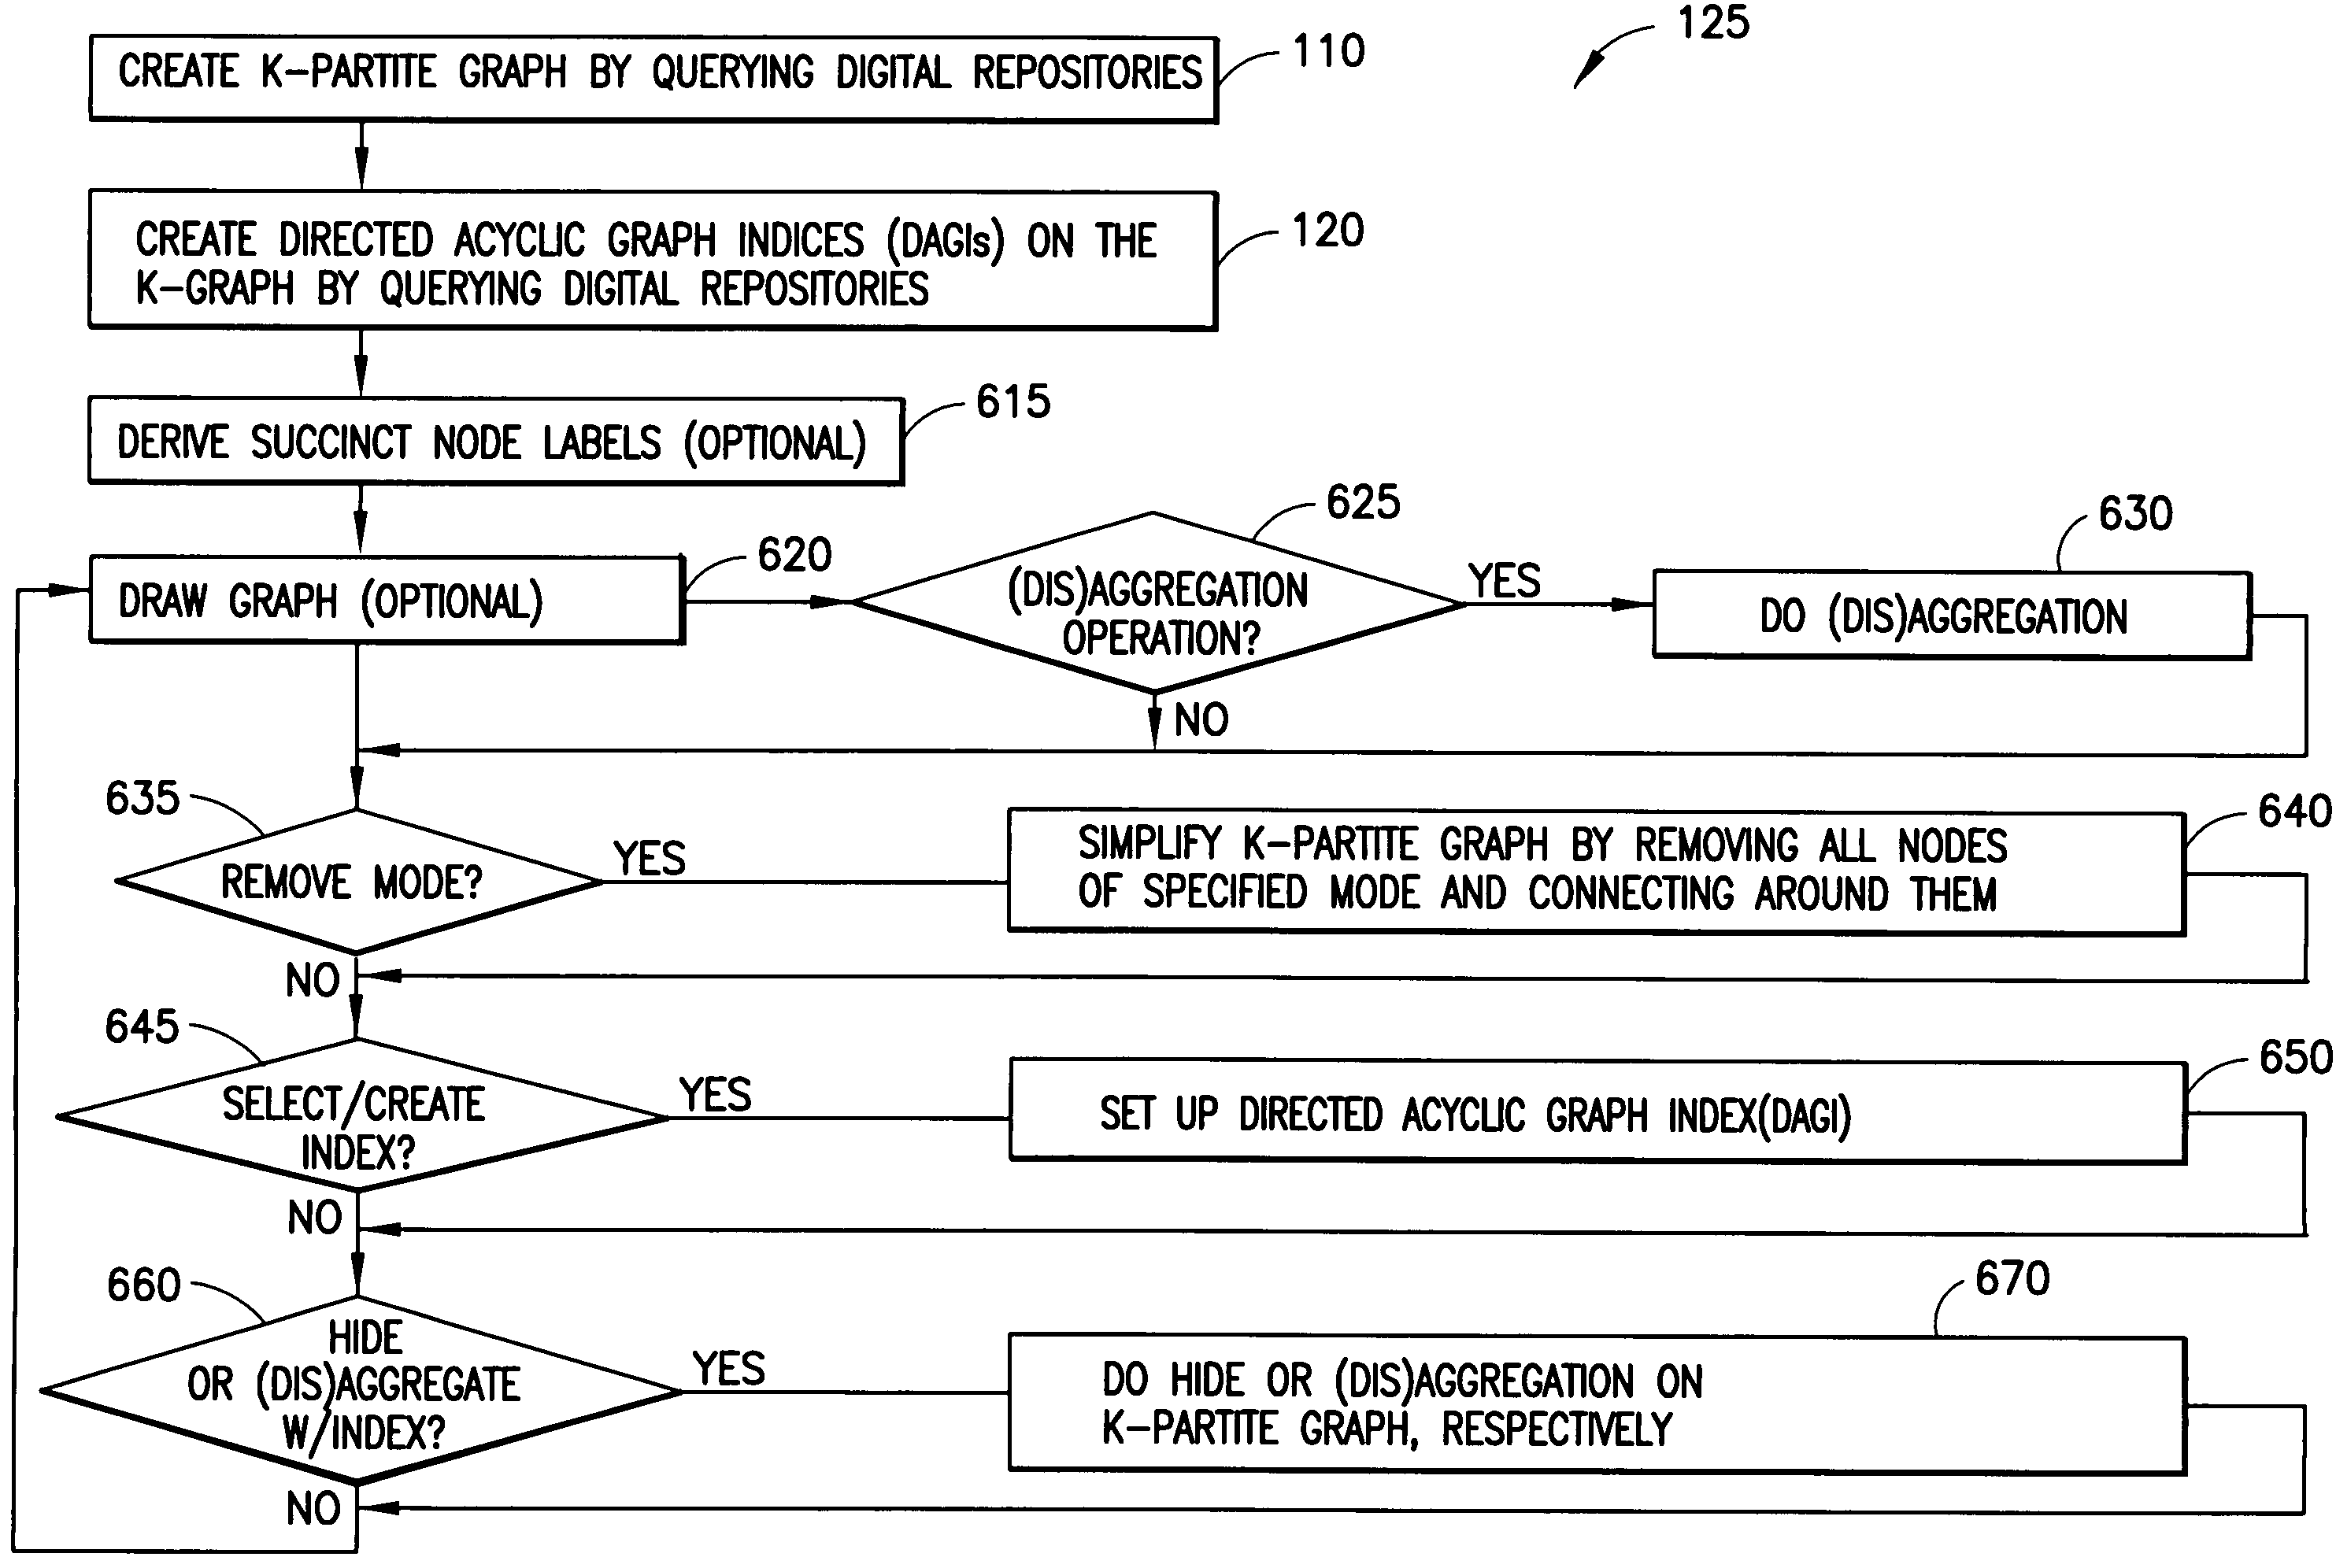 System and method for simplifying and manipulating k-partite graphs